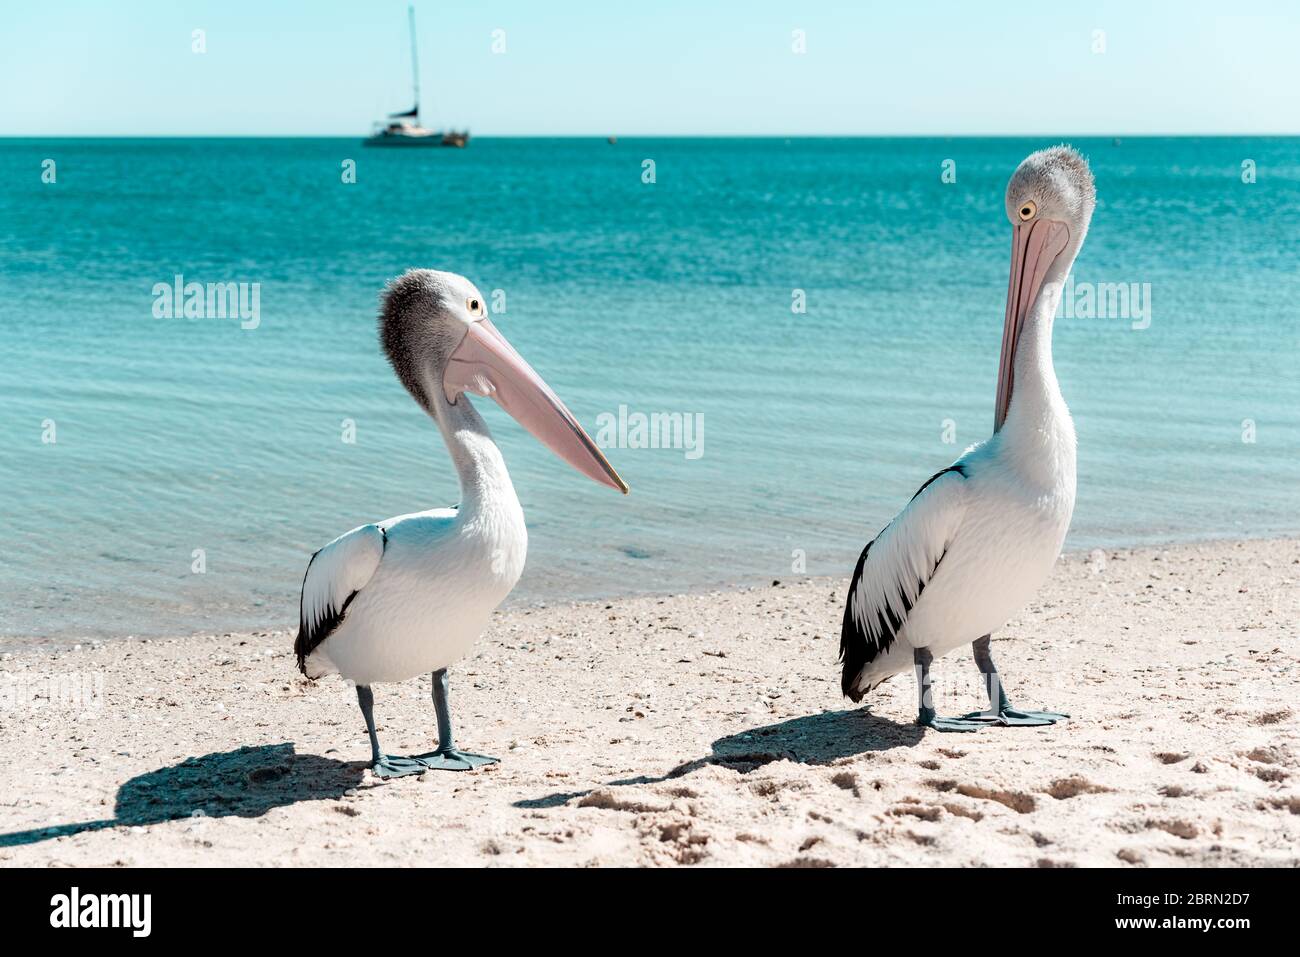 Wild Australian pelican standing on the shore of a sandy beach with turquoise waters of the Indian Ocean. Monkey Mia, WA Stock Photo